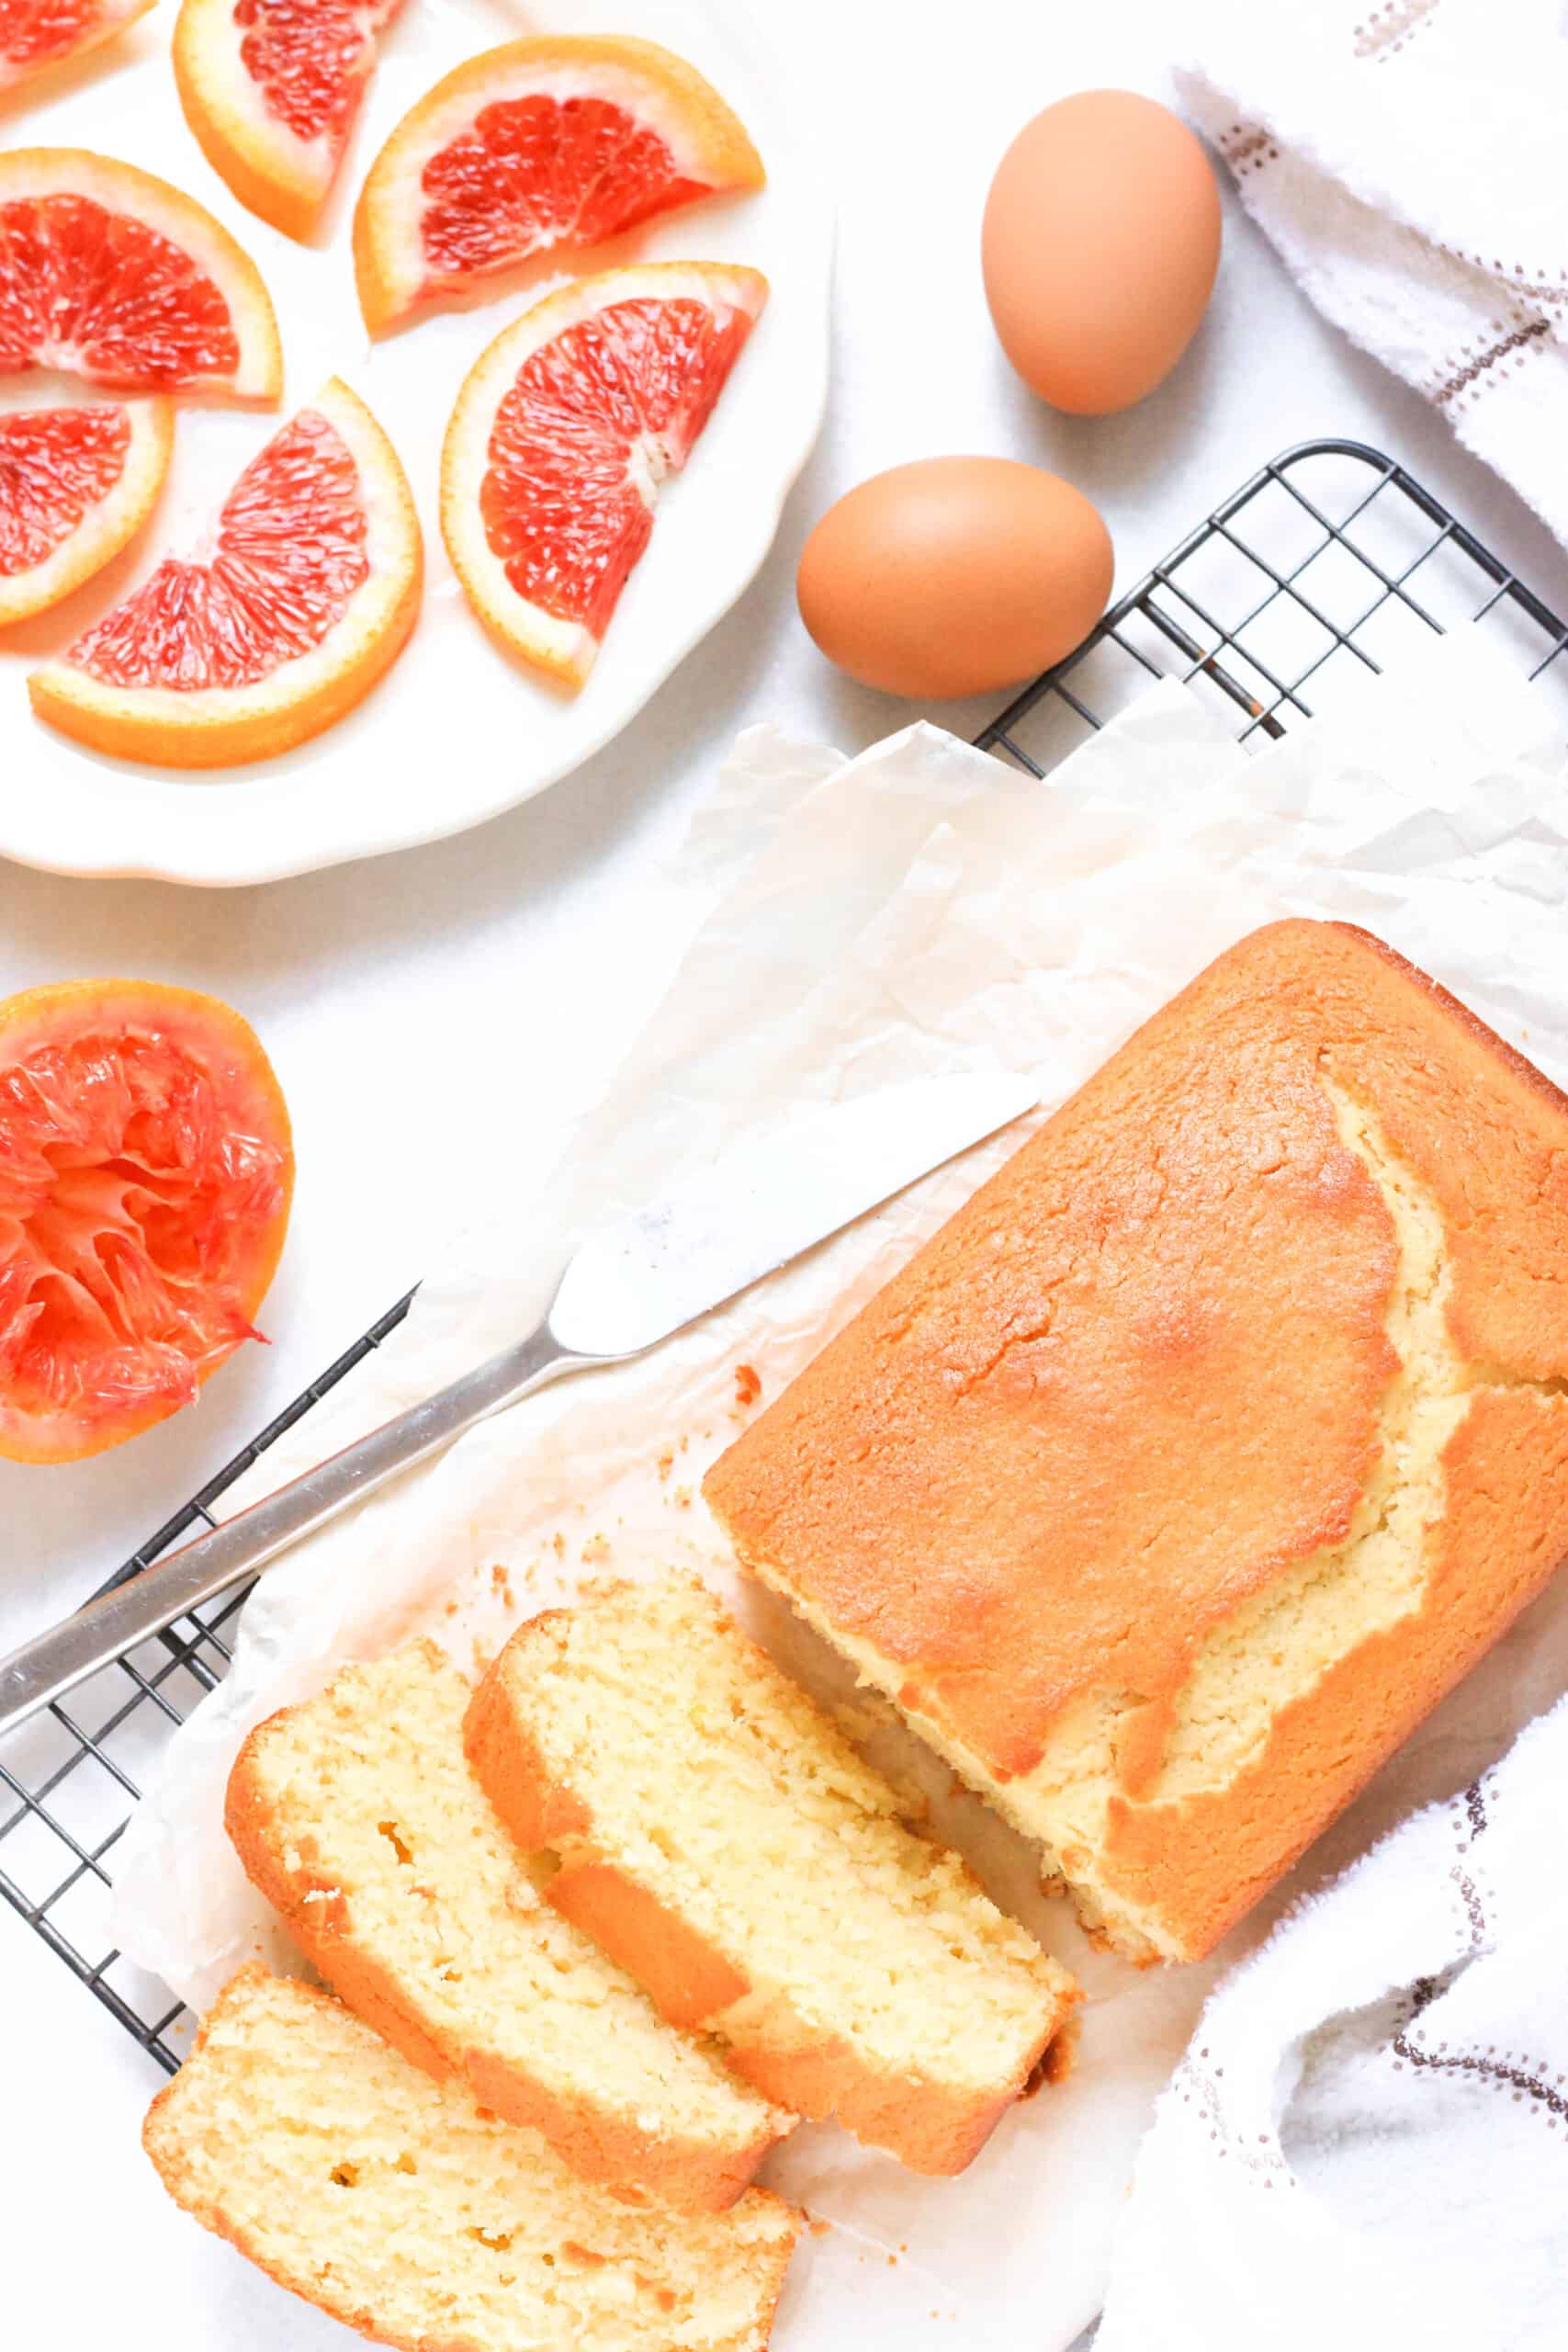 Top down view of blood orange pound cake on wire rack and slices of blood oranges.